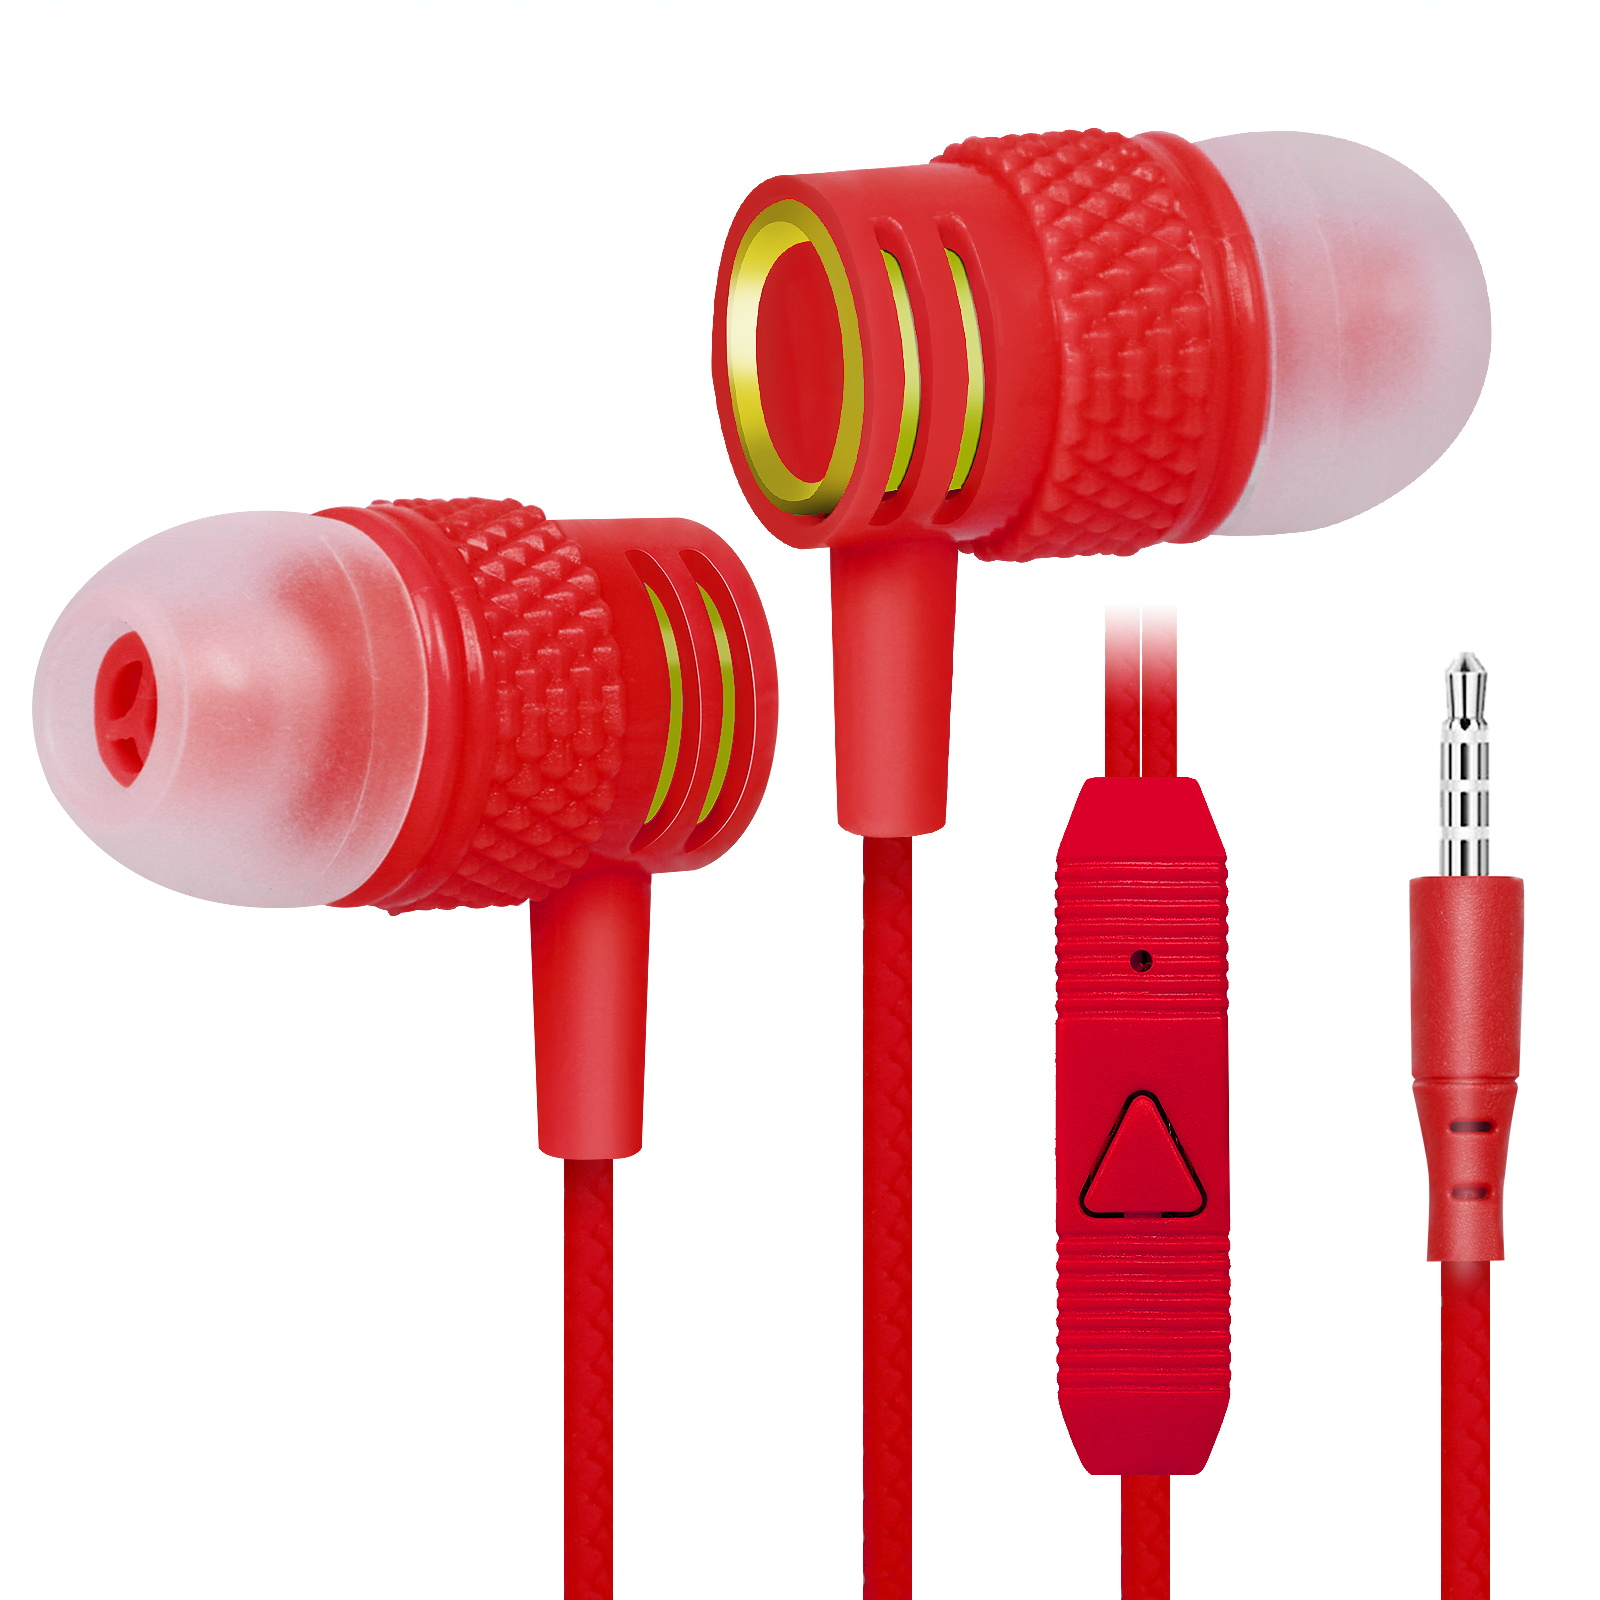 UrbanX R2 Wired in-Ear Headphones with Mic For Xiaomi Redmi 9C NFC with Tangle-Free Cord, Noise Isolating Earphones, Deep Bass, In Ear Bud Silicone Tips - image 1 of 3